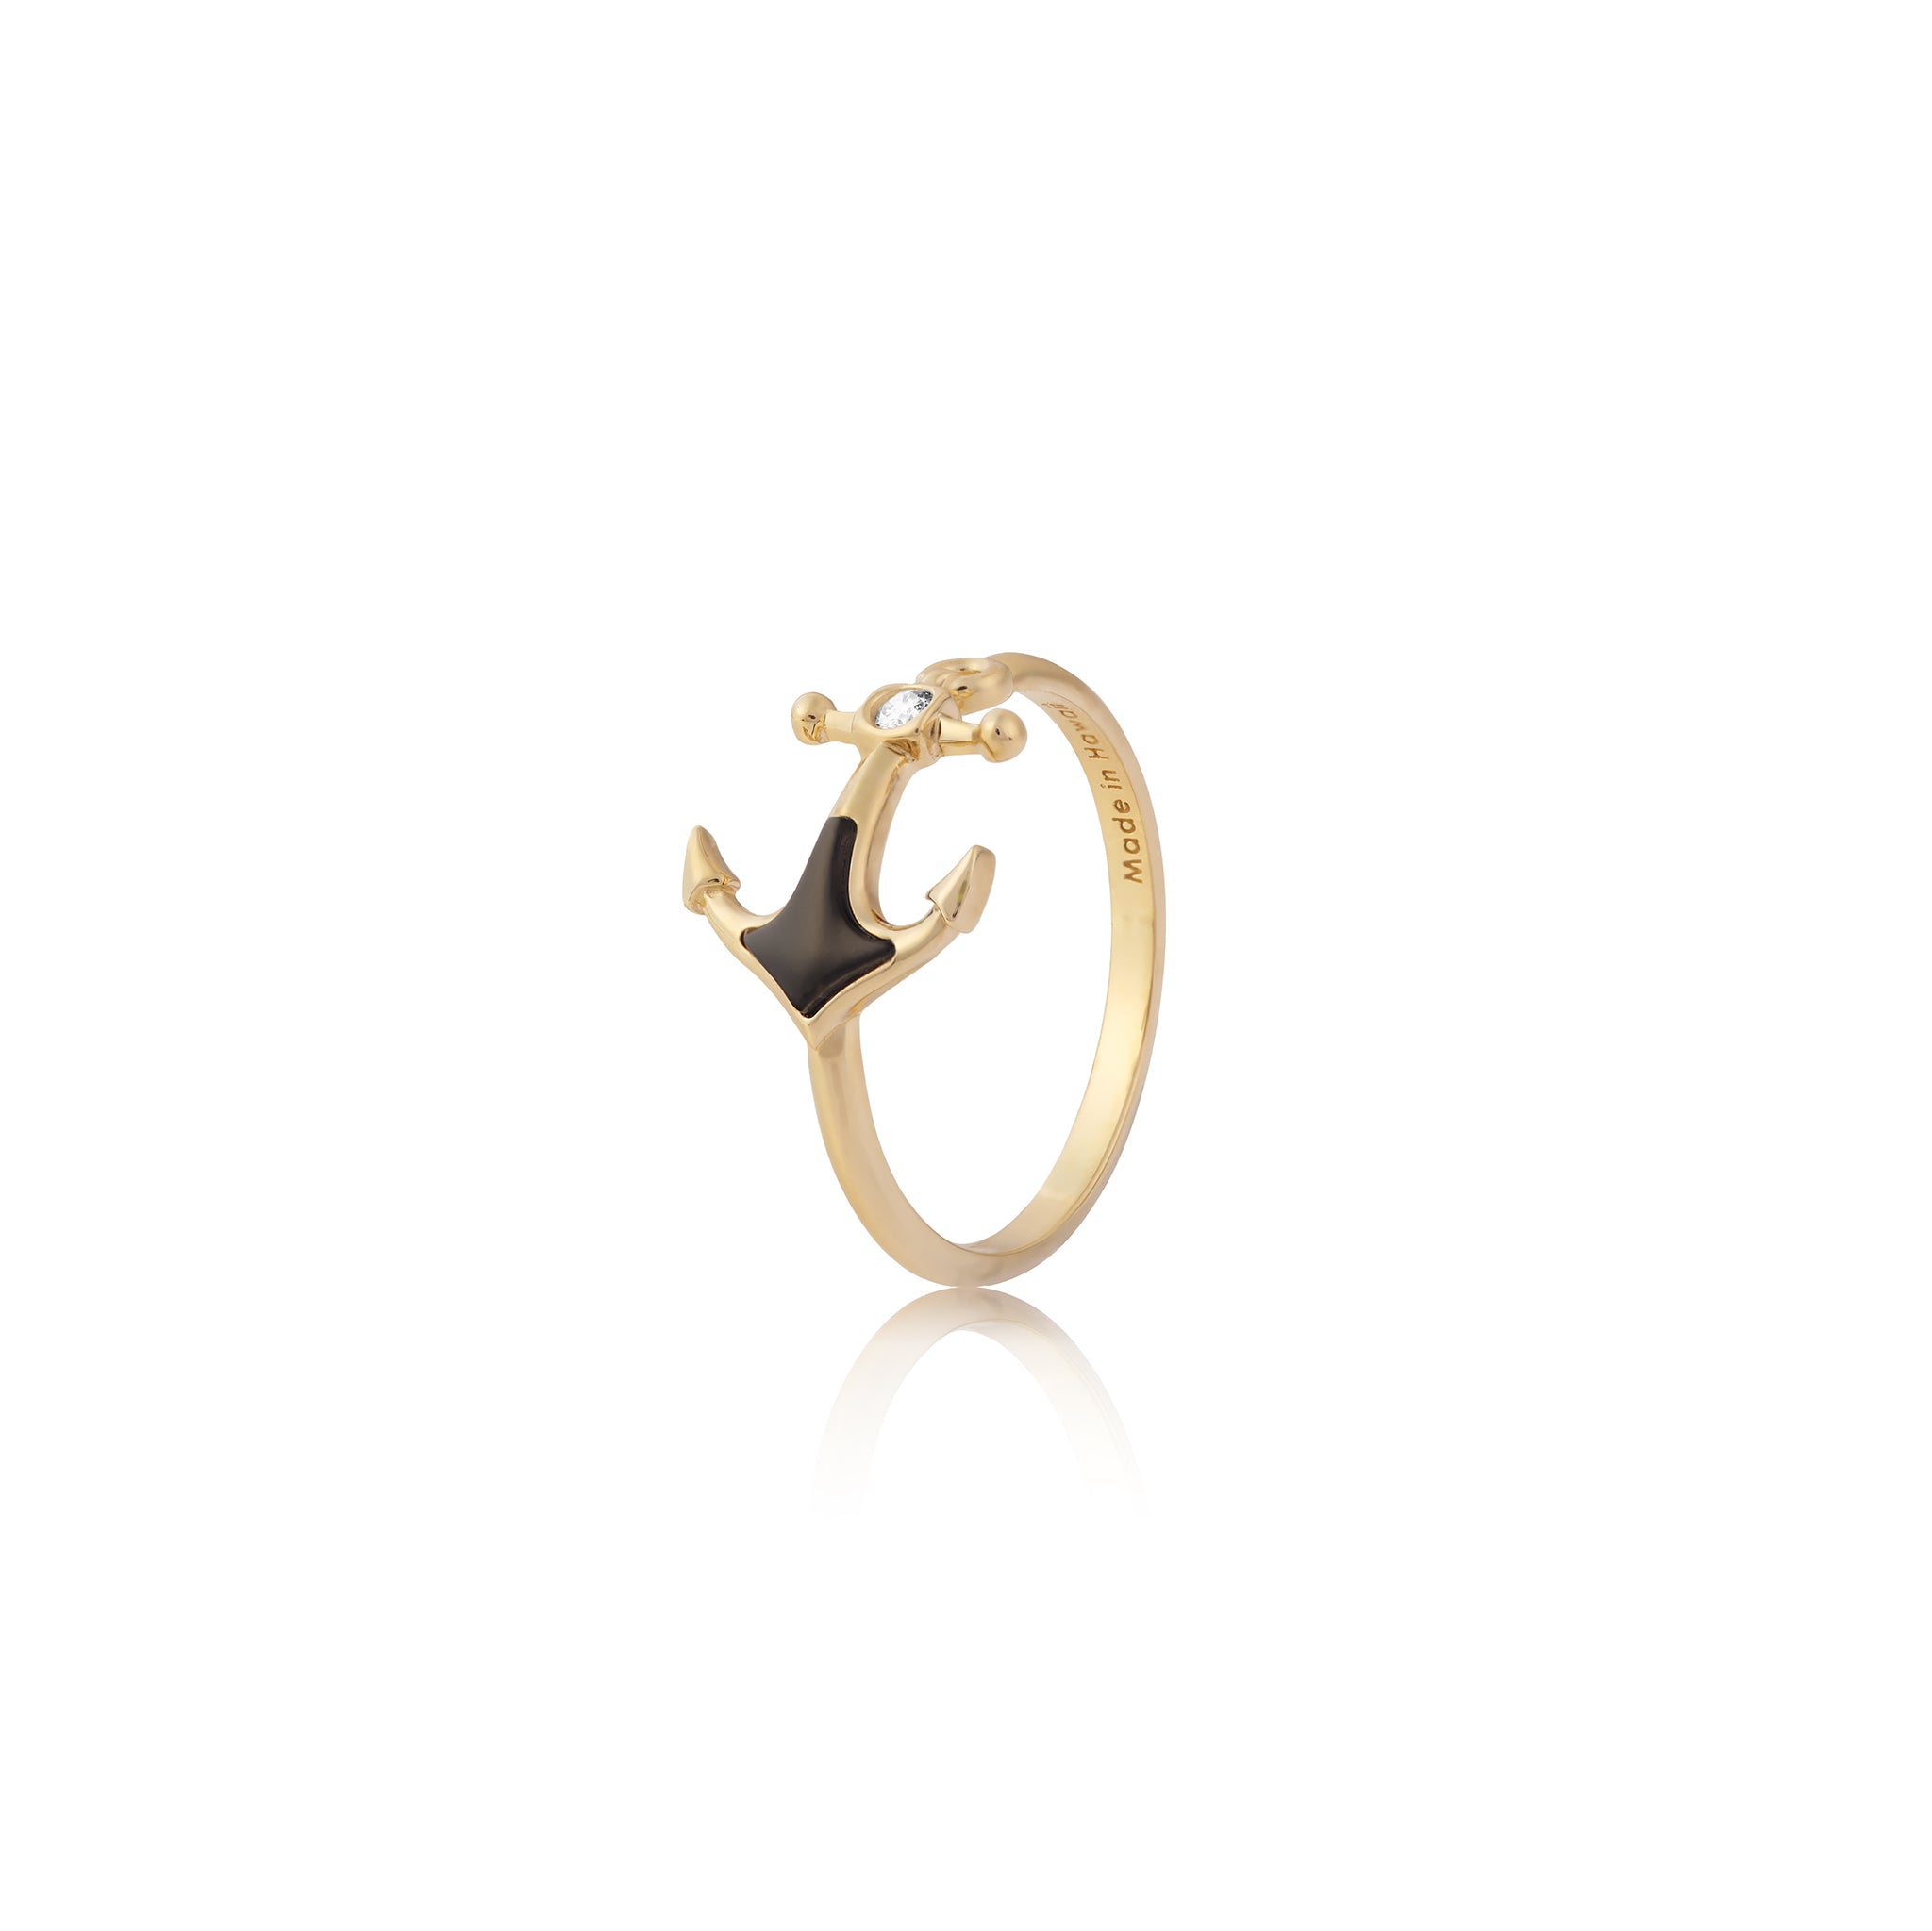 Sealife Anchor Black Coral Ring in Gold with Diamonds - 11mm